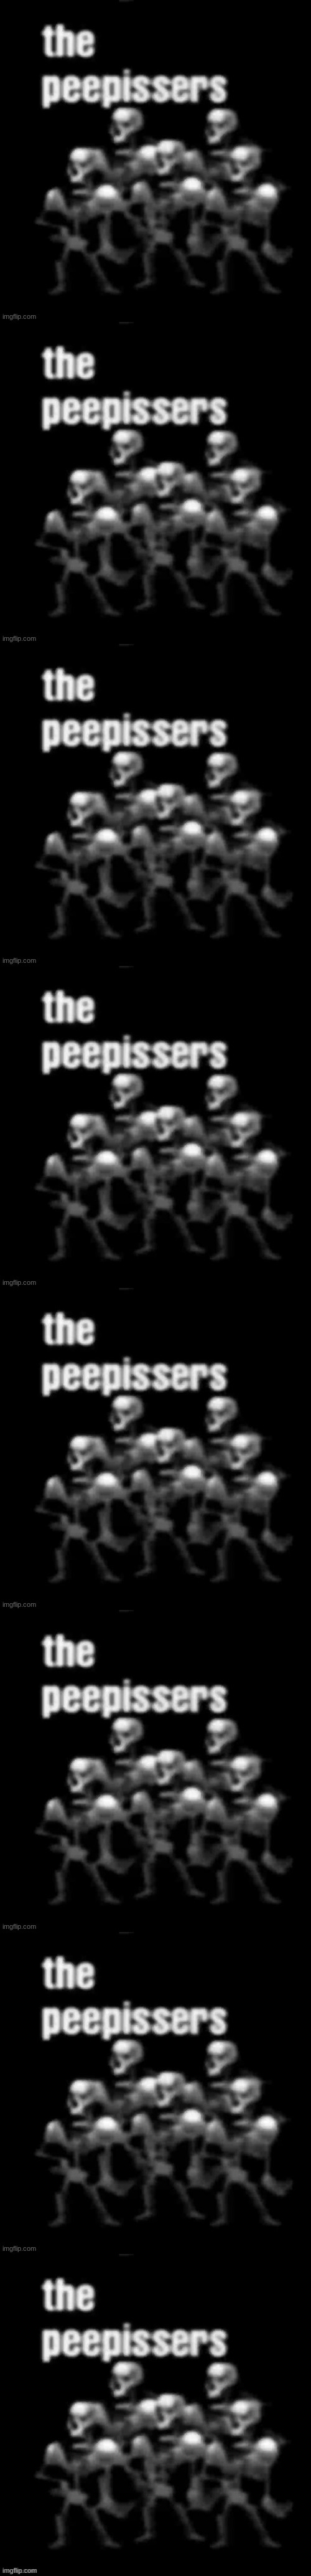 image tagged in the peepissers | made w/ Imgflip meme maker